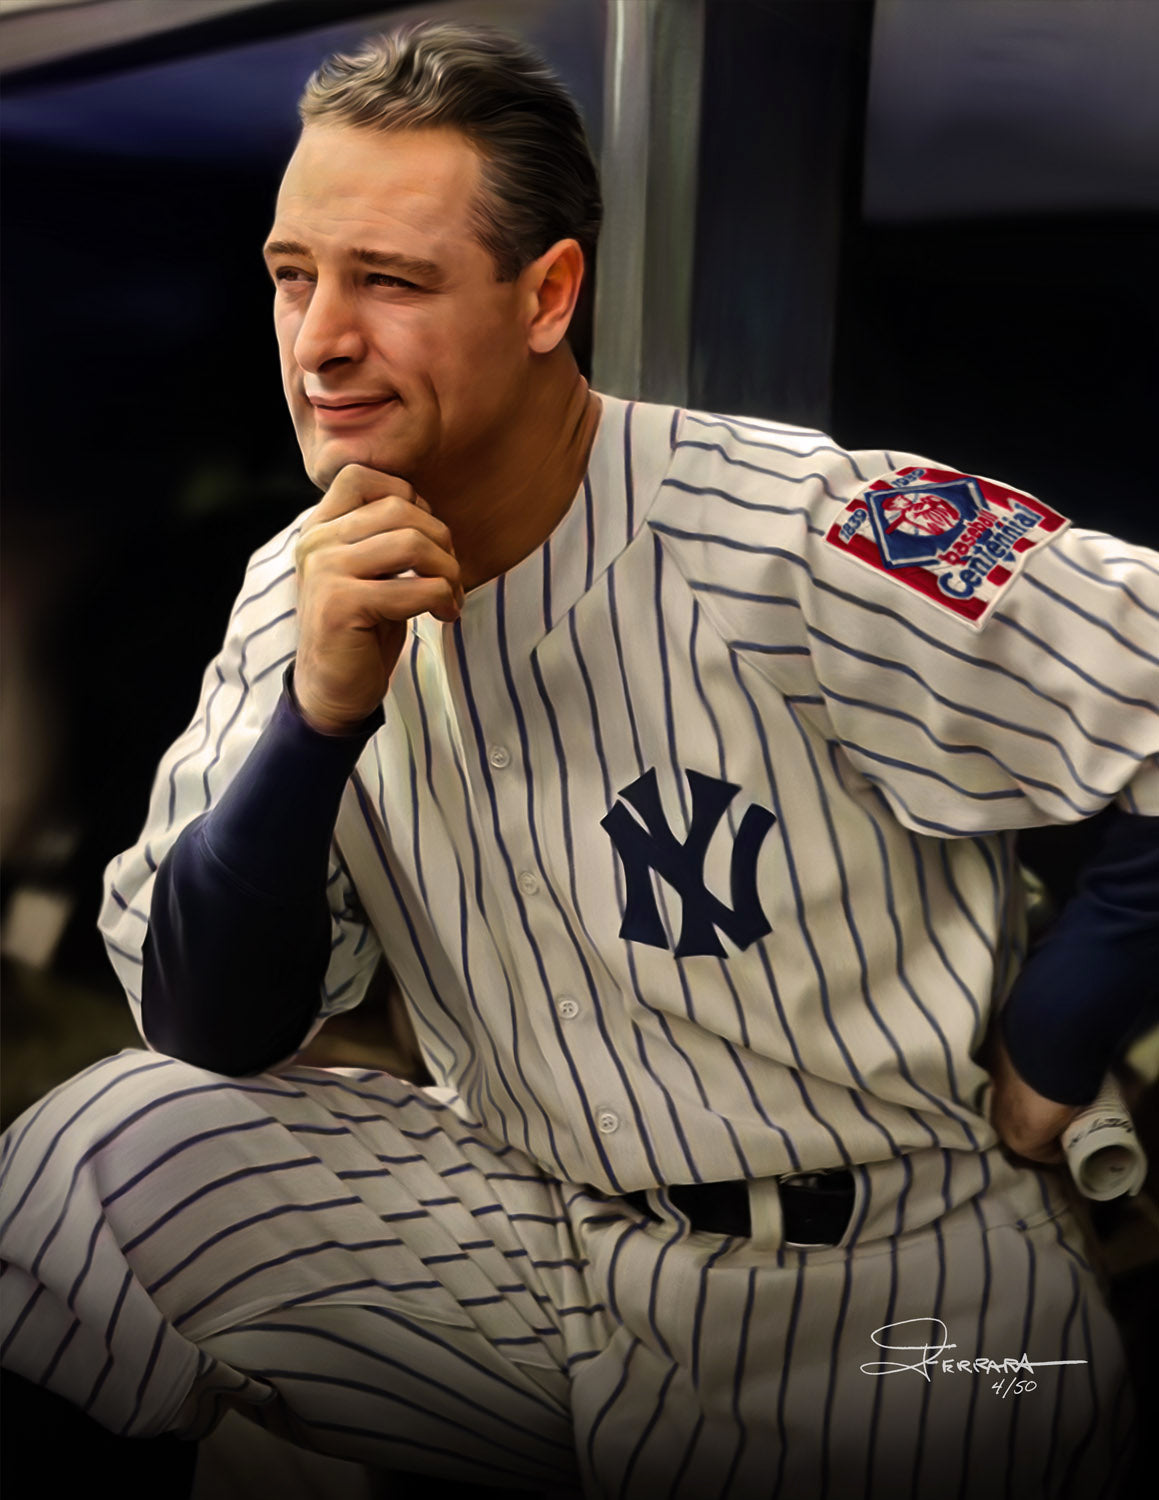 Lou Gehrig (1939), The Iron Horse – ChampionshipArt - The Art of